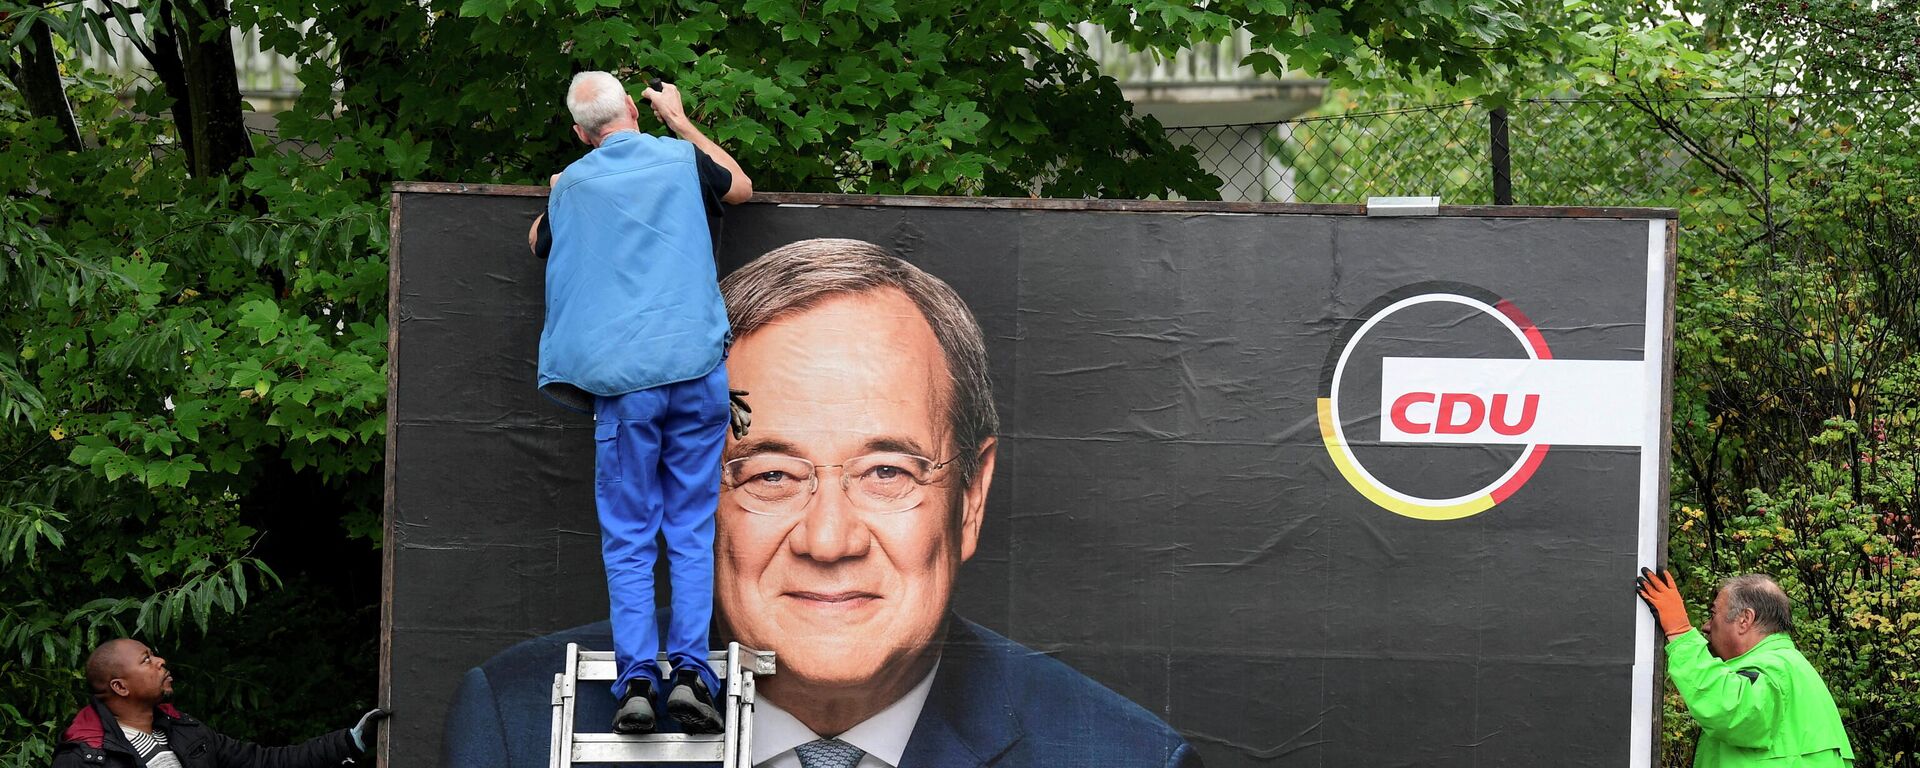 Workers remove an election campaign poster showing Armin Laschet, candidate for Chancellor of Germany's Christian Democratic Union party CDU, the day after the German general elections, in Bad Segeberg near Hamburg, Germany, September 27, 2021 - Sputnik International, 1920, 27.09.2021